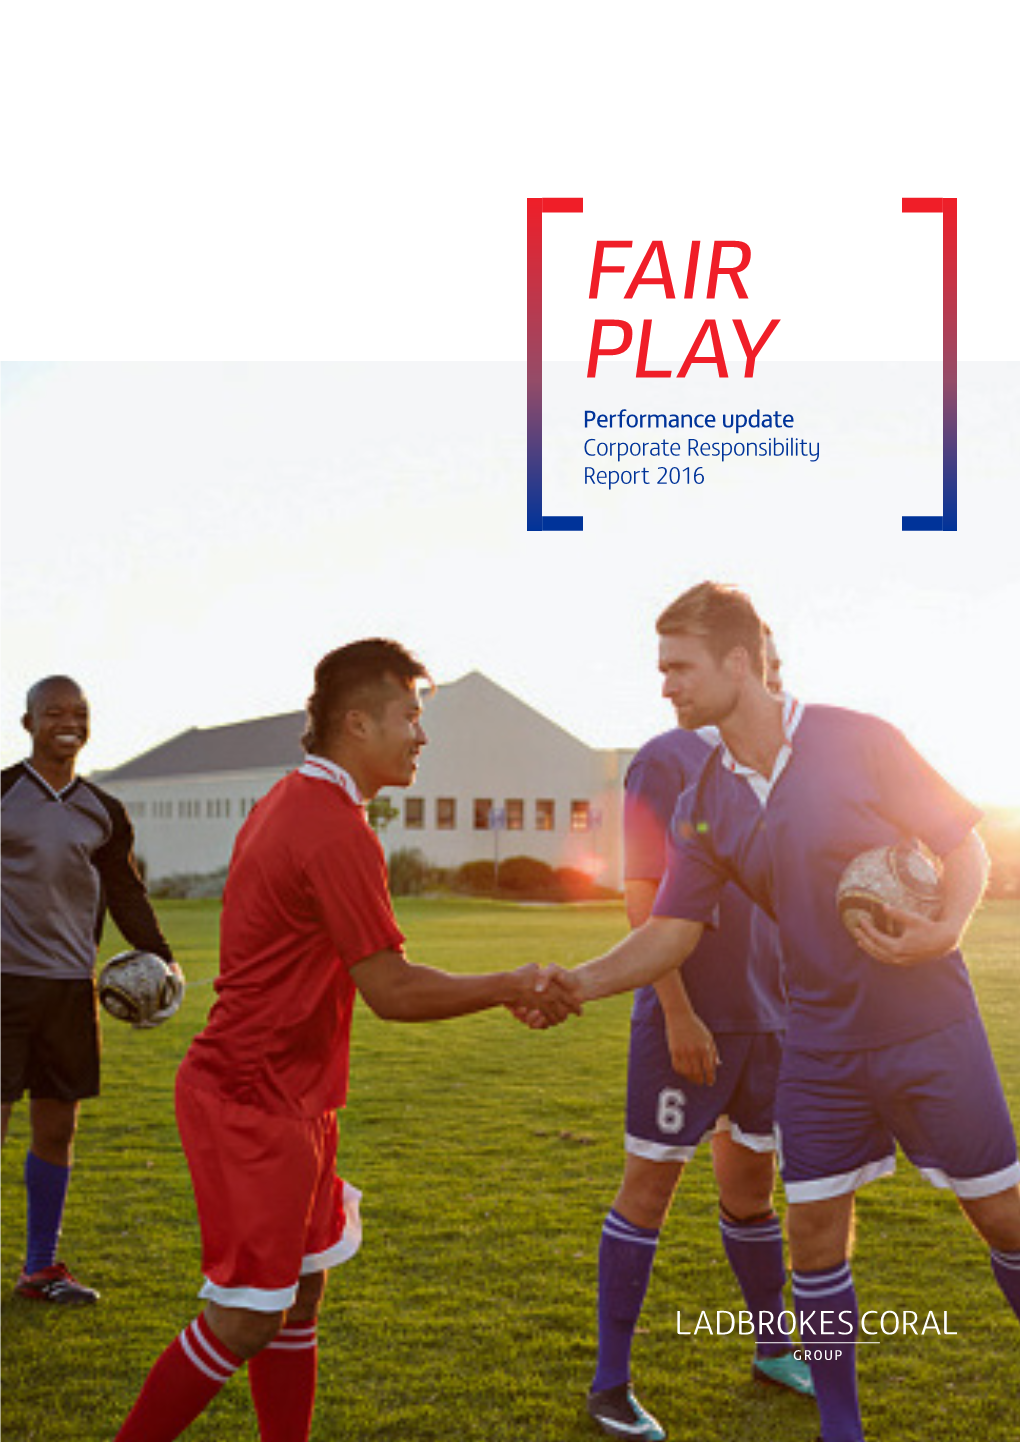 FAIR PLAY Performance Update Corporate Responsibility Report 2016 Corporate Responsibility Report 2016 Fair Play: a Shared Goal